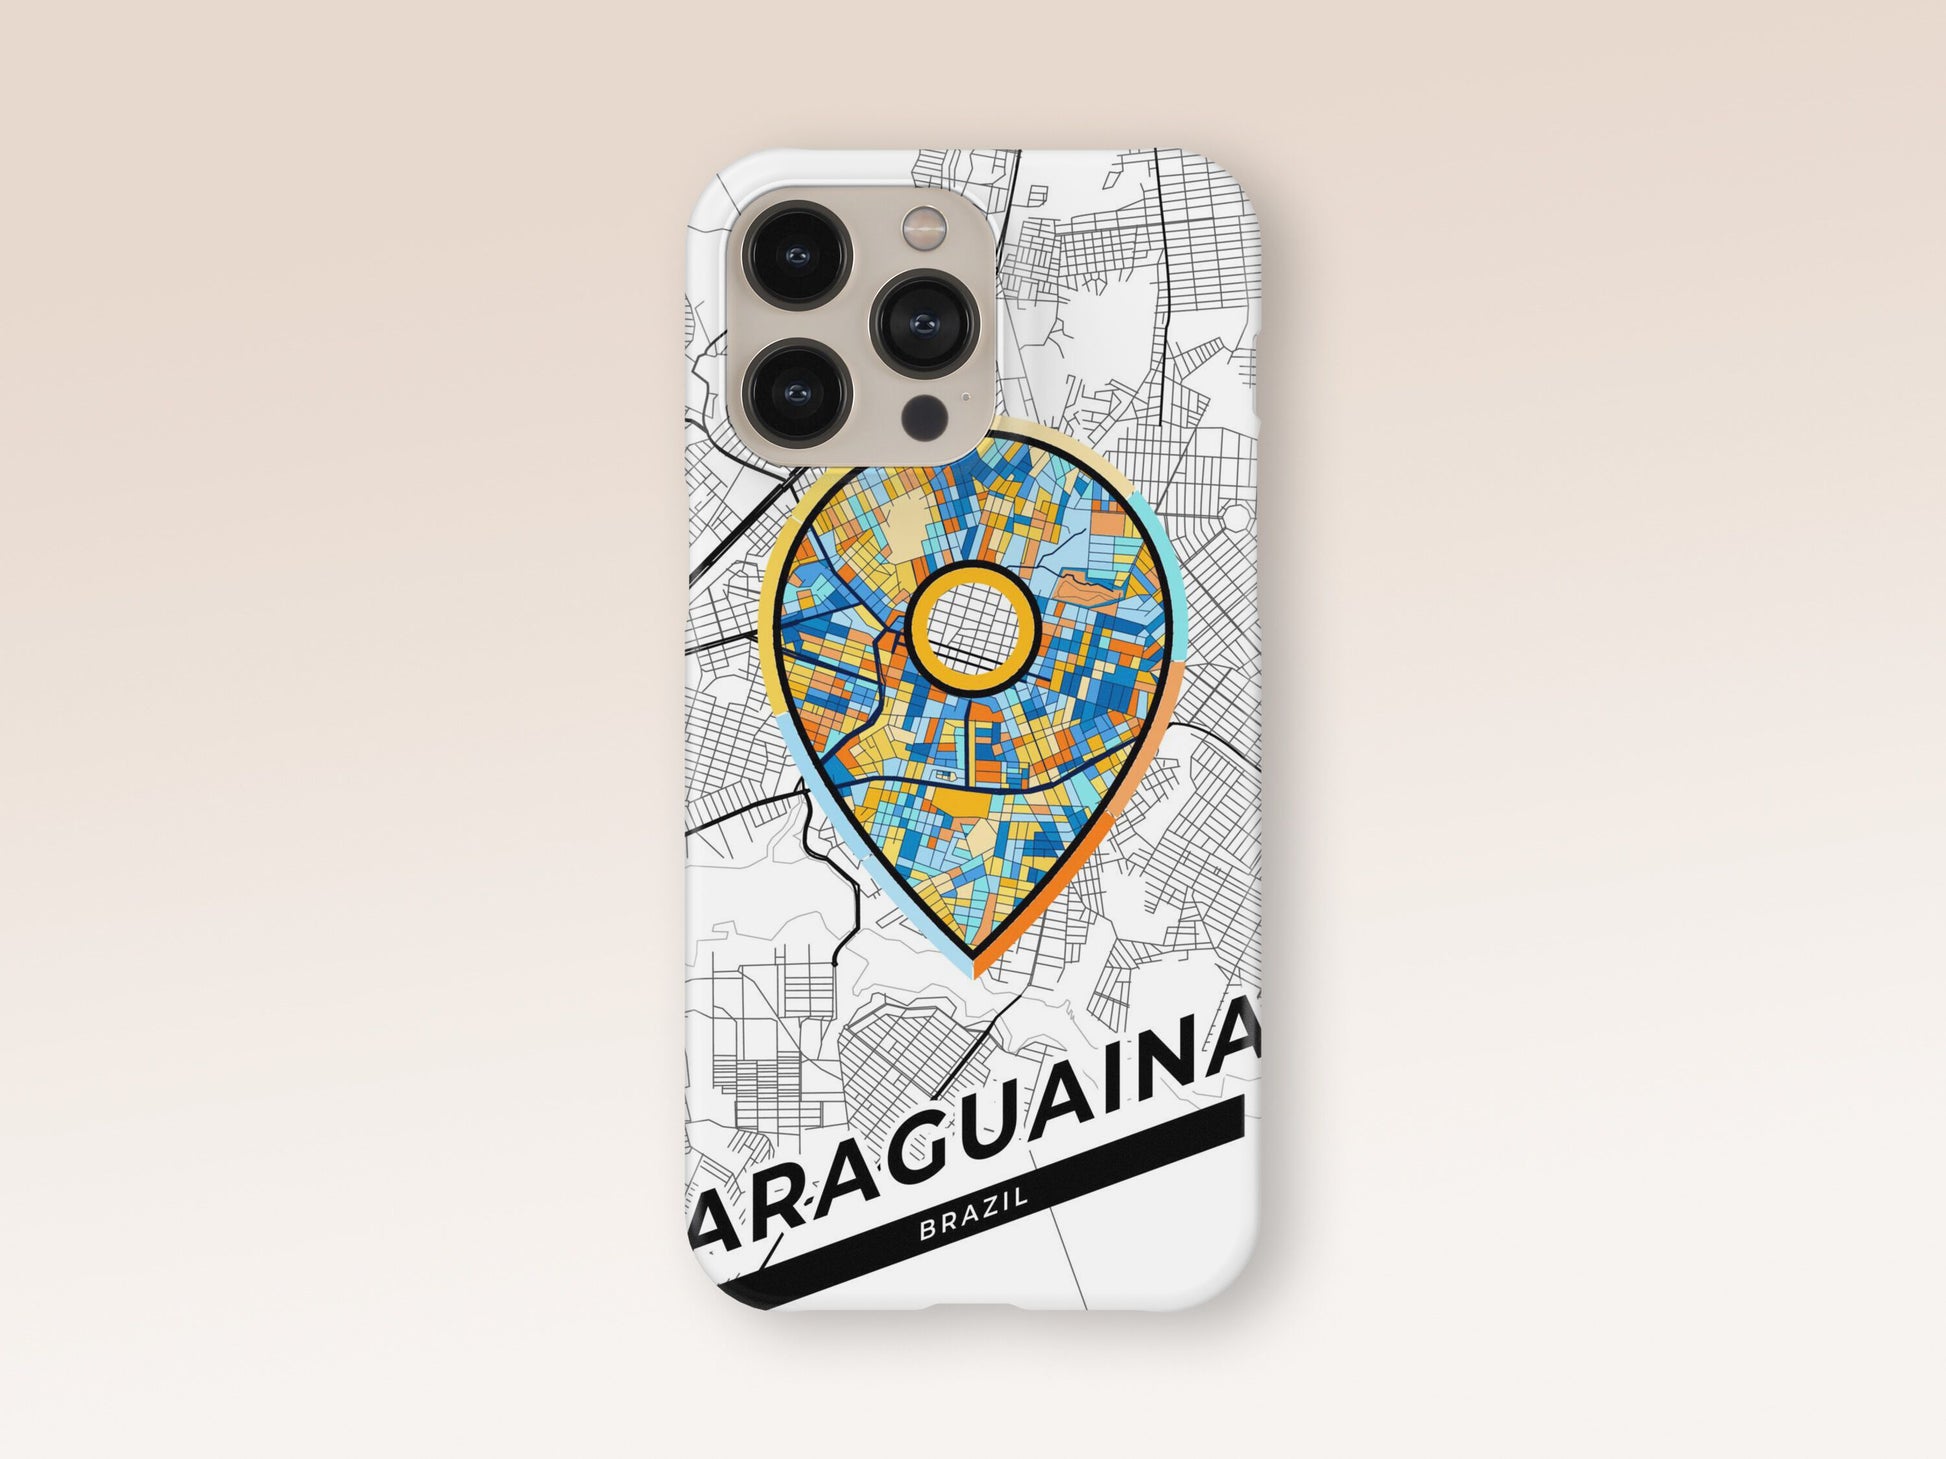 Araguaina Brazil slim phone case with colorful icon. Birthday, wedding or housewarming gift. Couple match cases. 1